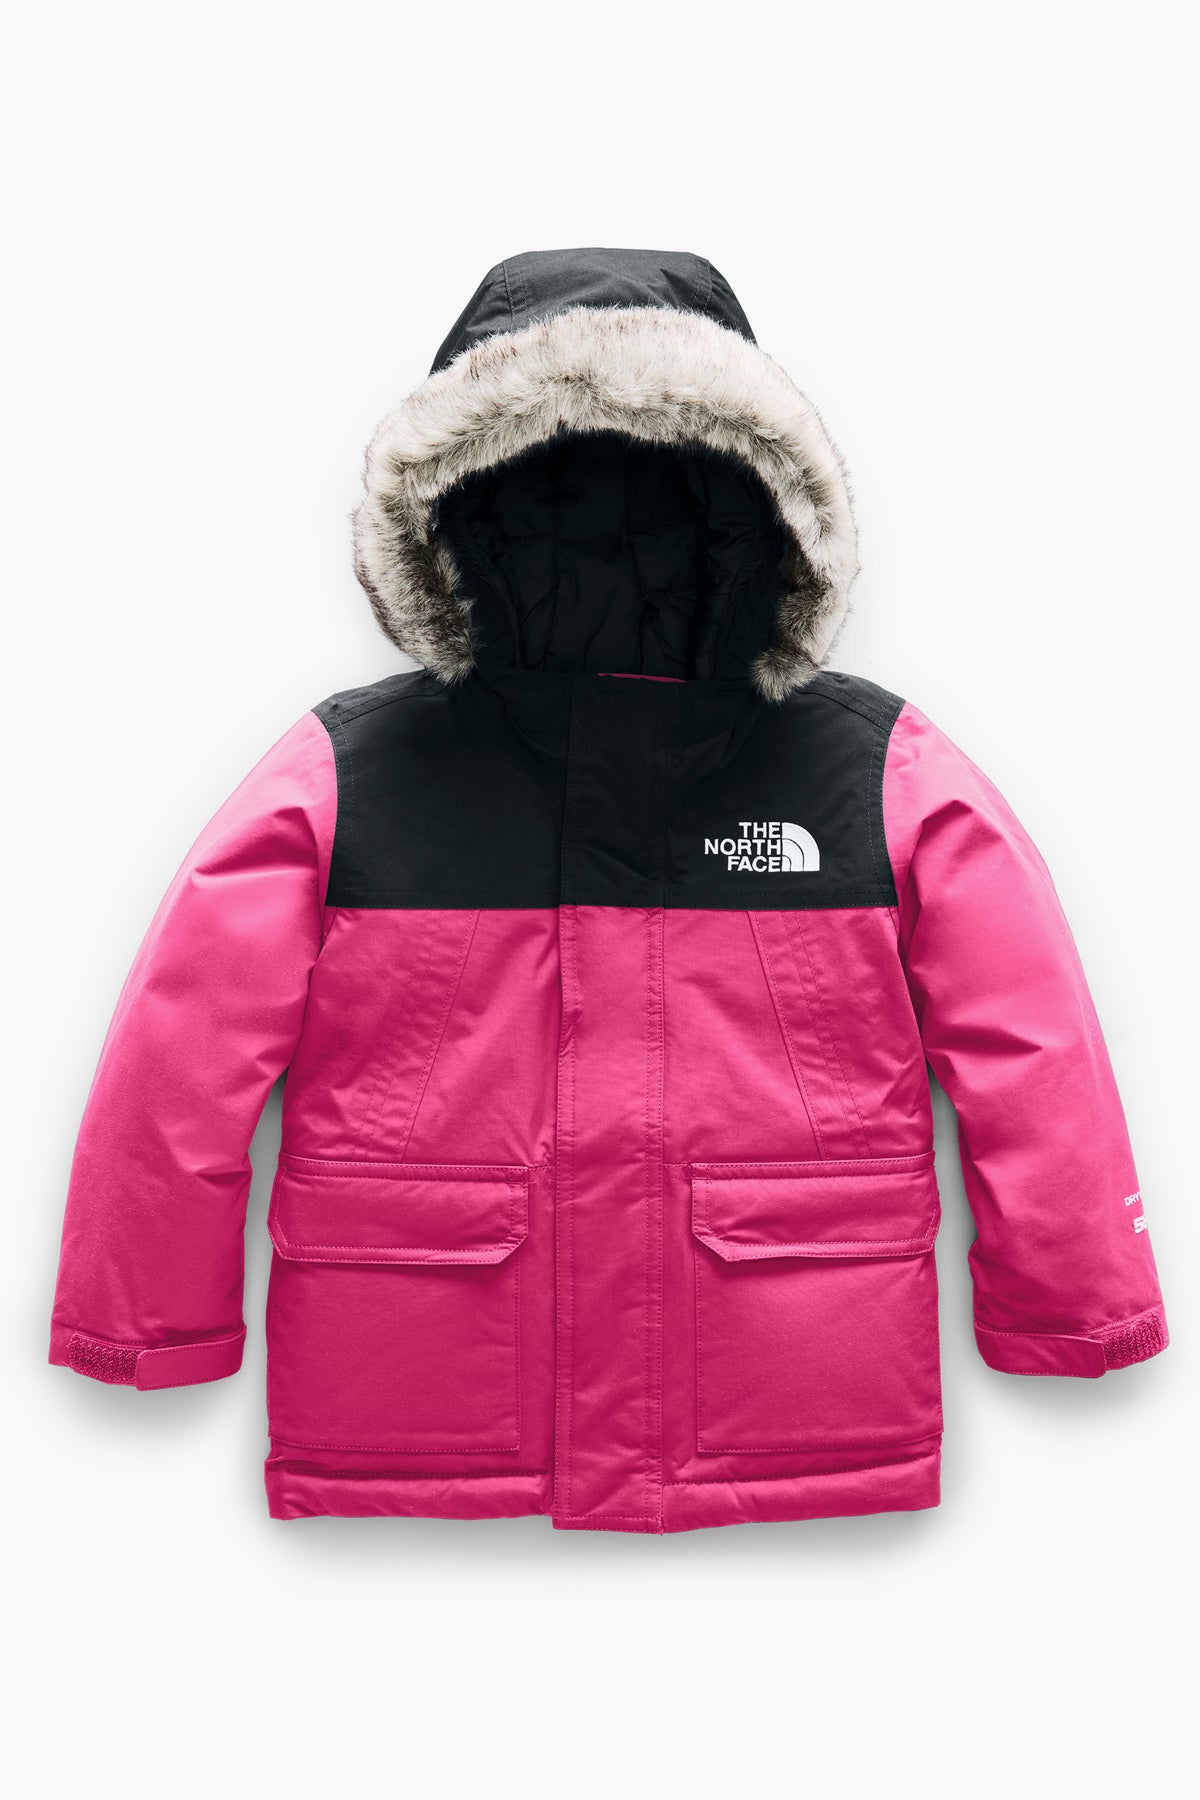 the north face childrens coats